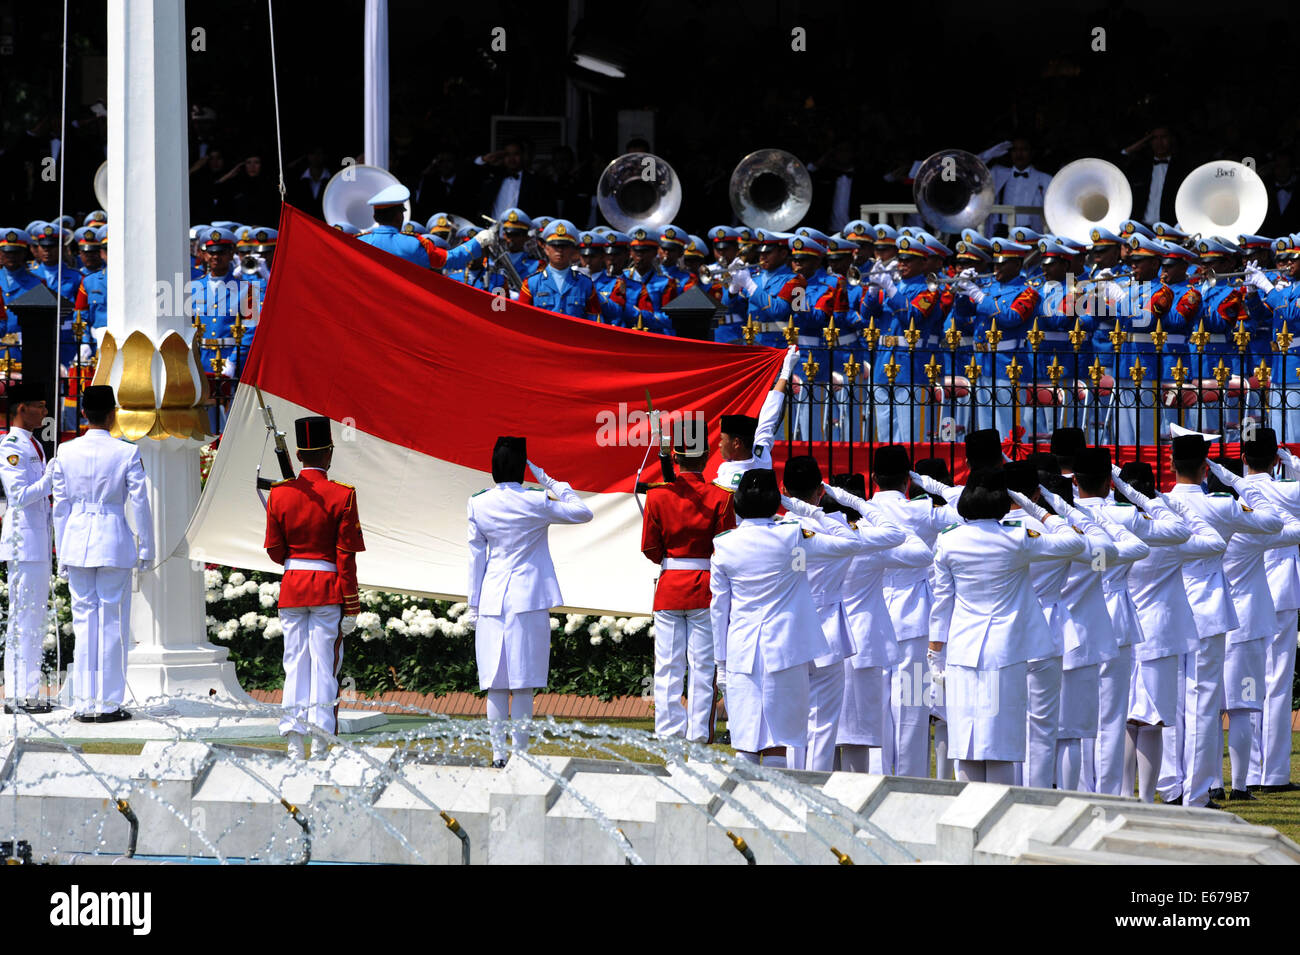 Jakarta, Indonesia. 17th Aug, 2014. Indonesian flag-raising squads salute to the national flag during a celebration of the country's 69th independence anniversary at the presidential palace in Jakarta, Indonesia, Aug. 17, 2014. Credit:  Agung Kuncahya B./Xinhua/Alamy Live News Stock Photo